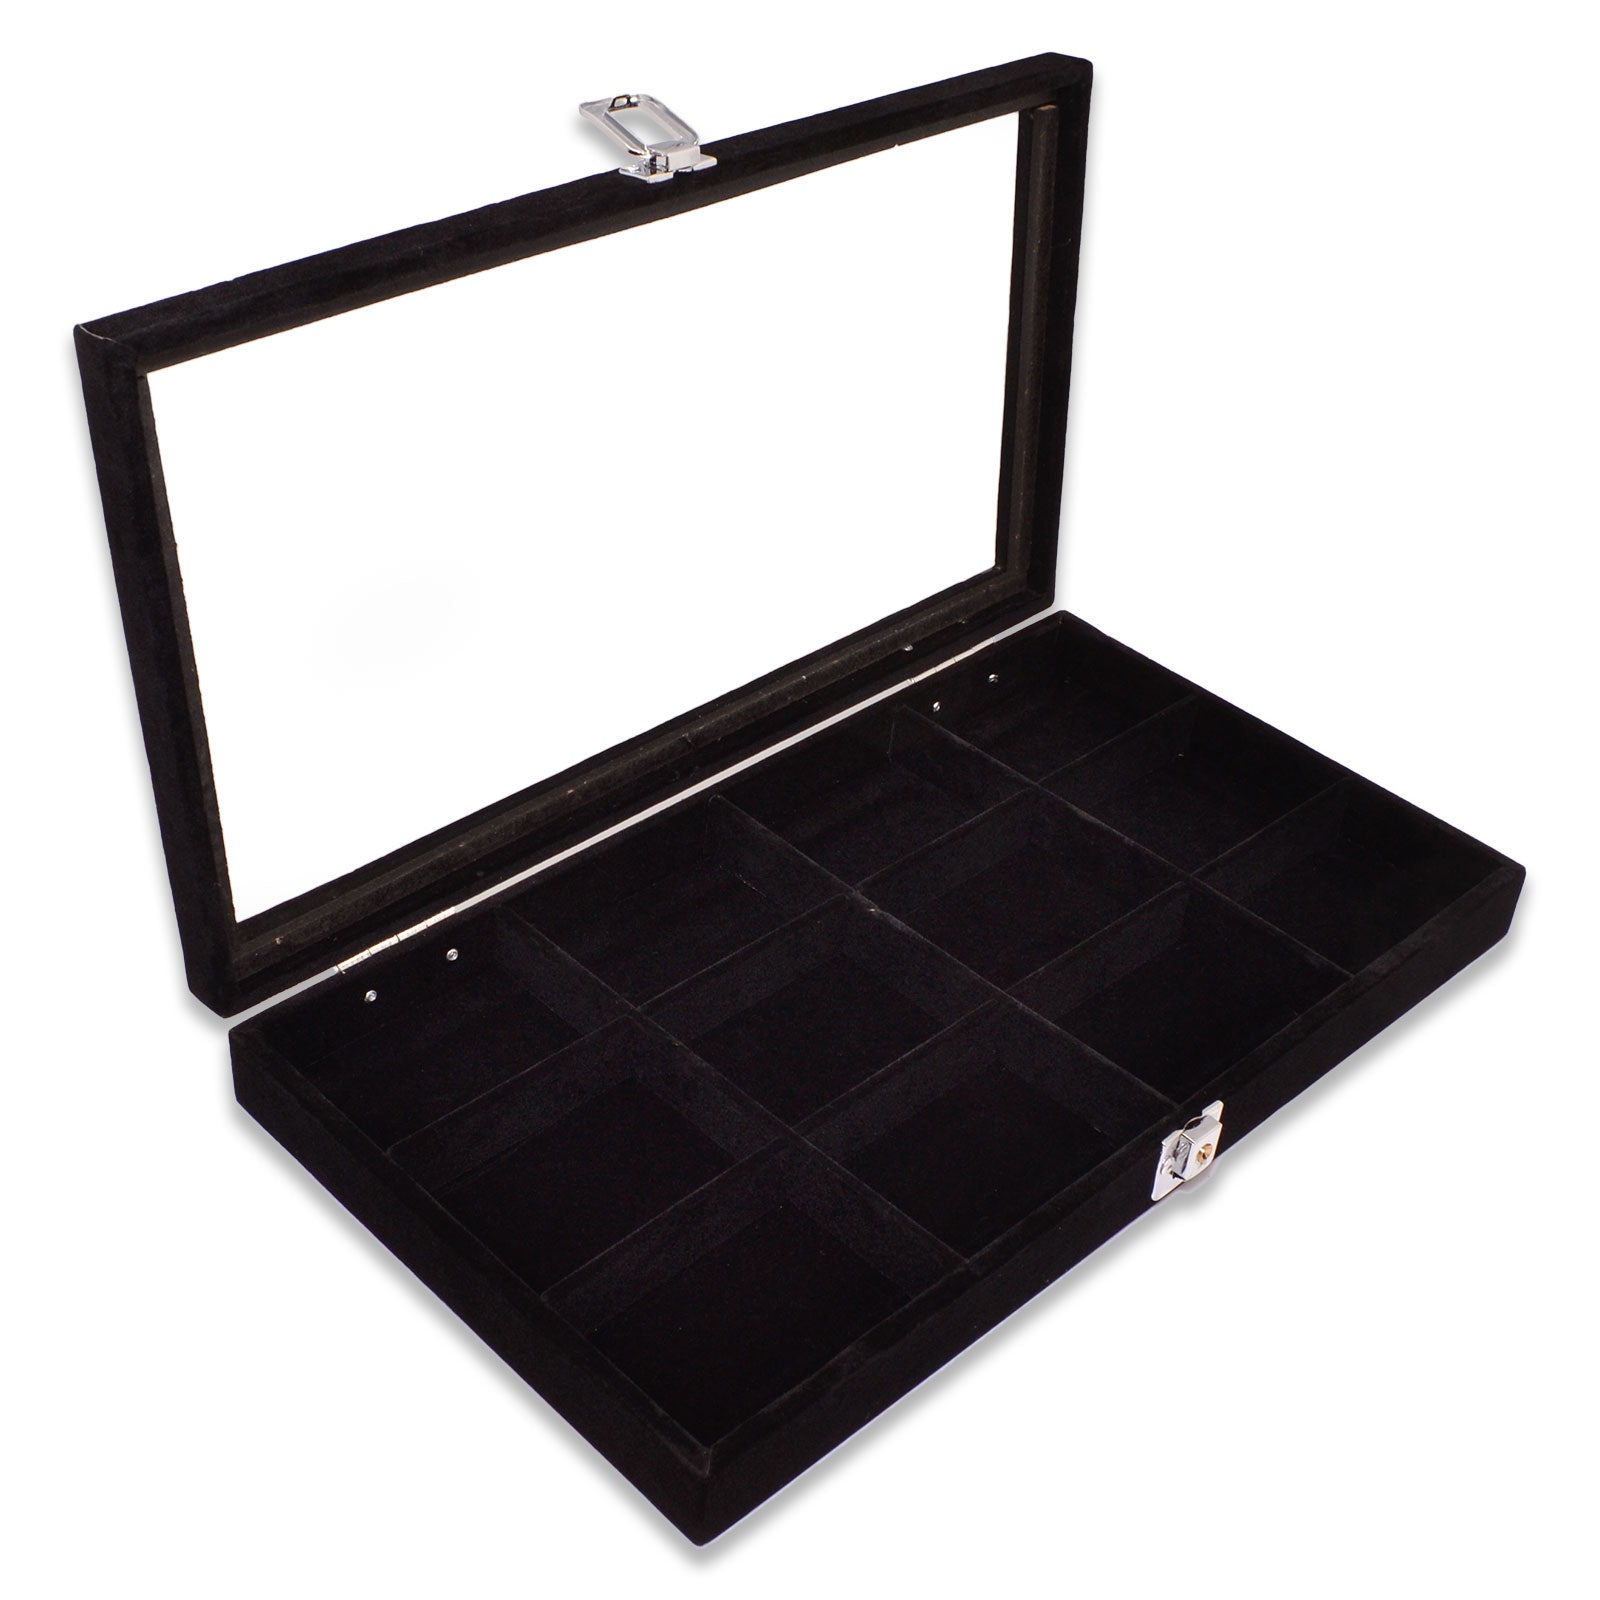 14 3/4" x 8 1/4" 12 Compartment Black Velvet Display Case w/ Glass Top and Key